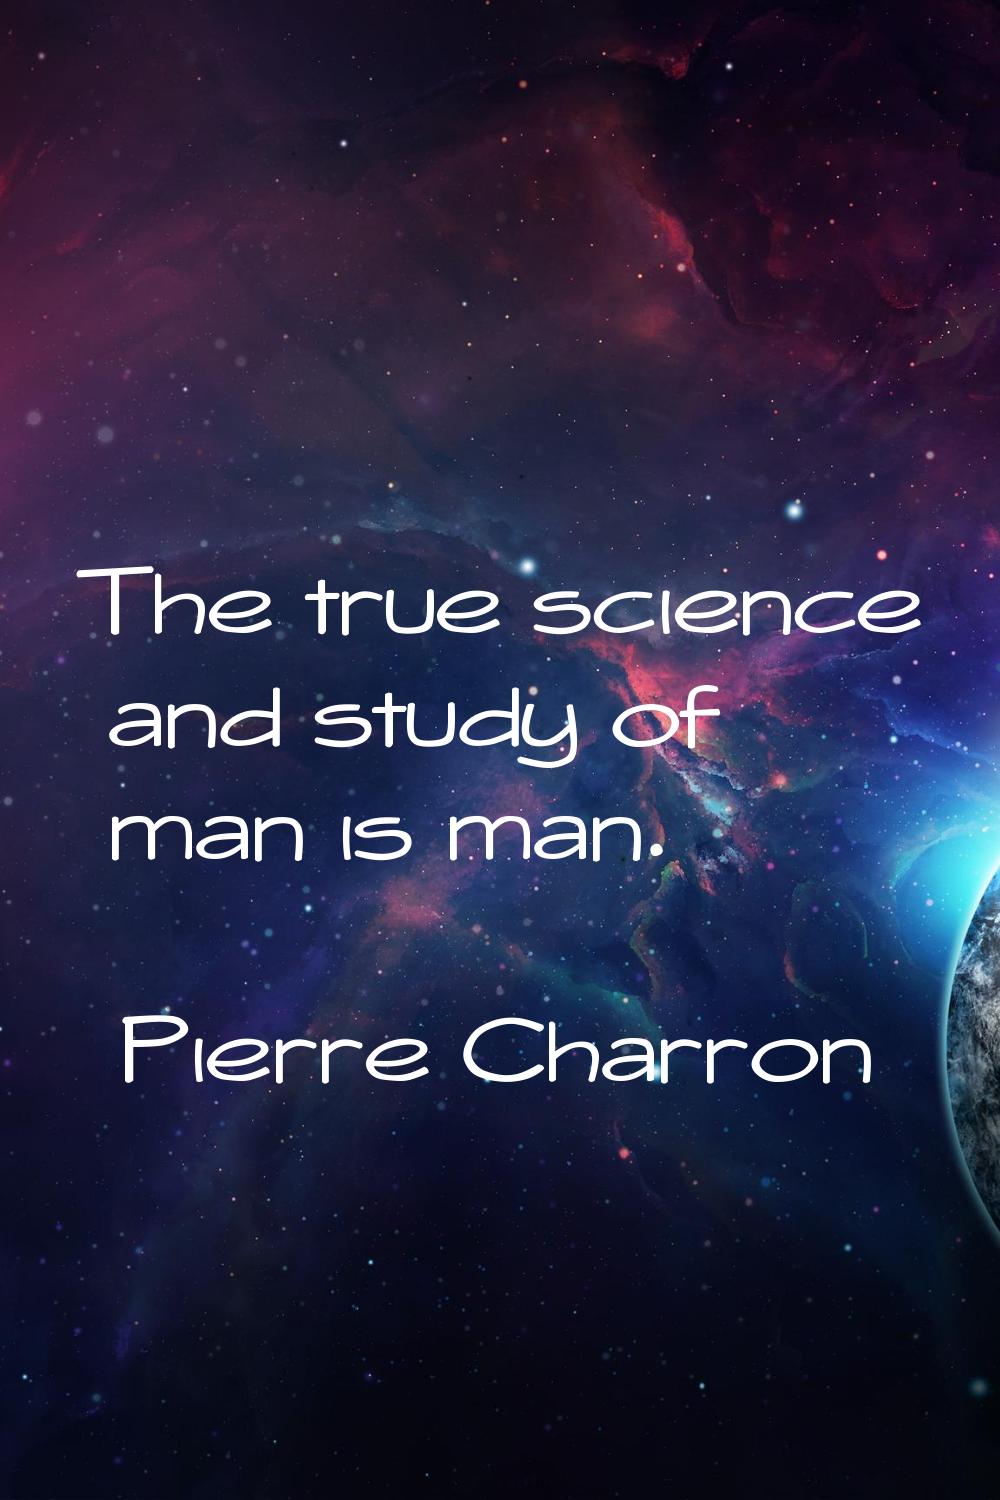 The true science and study of man is man.